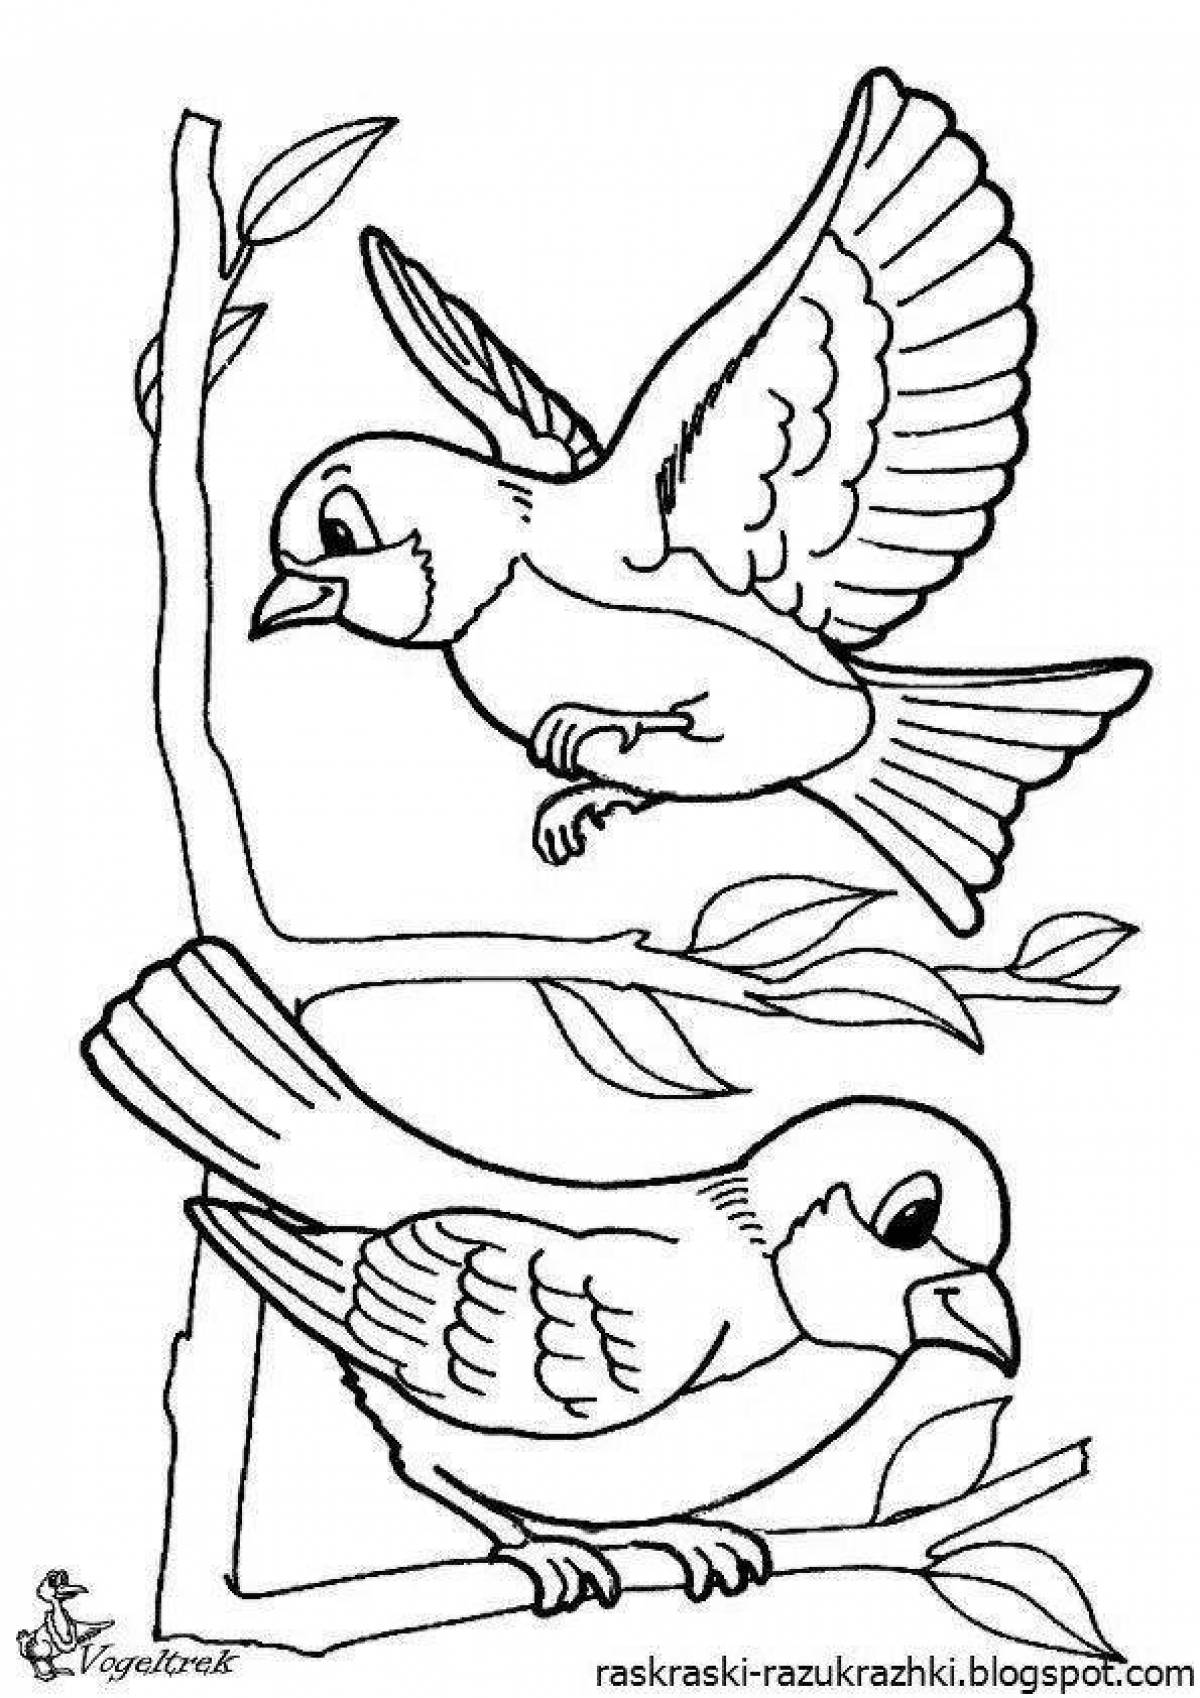 Colouring bright sparrow for children 6-7 years old